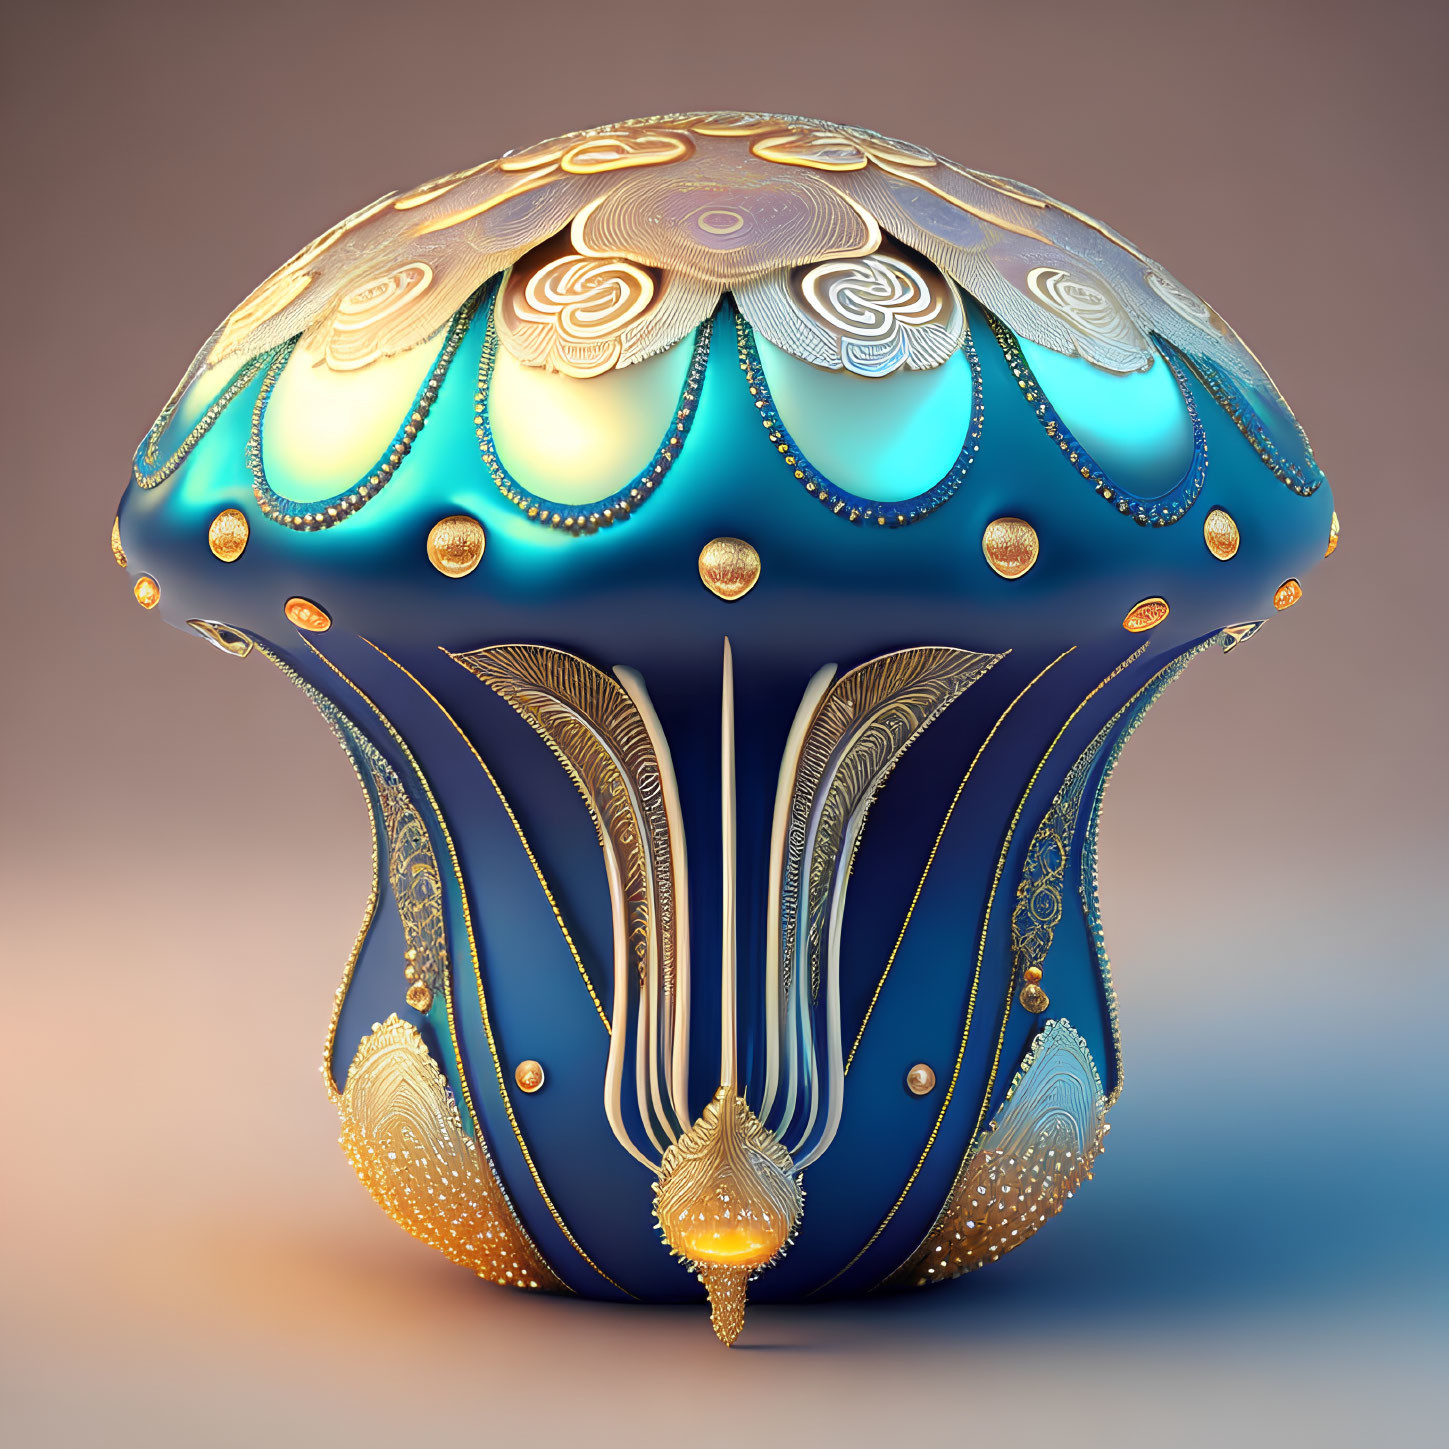 Fantasy mushroom digital art: vibrant blue cap with intricate gold and white patterns